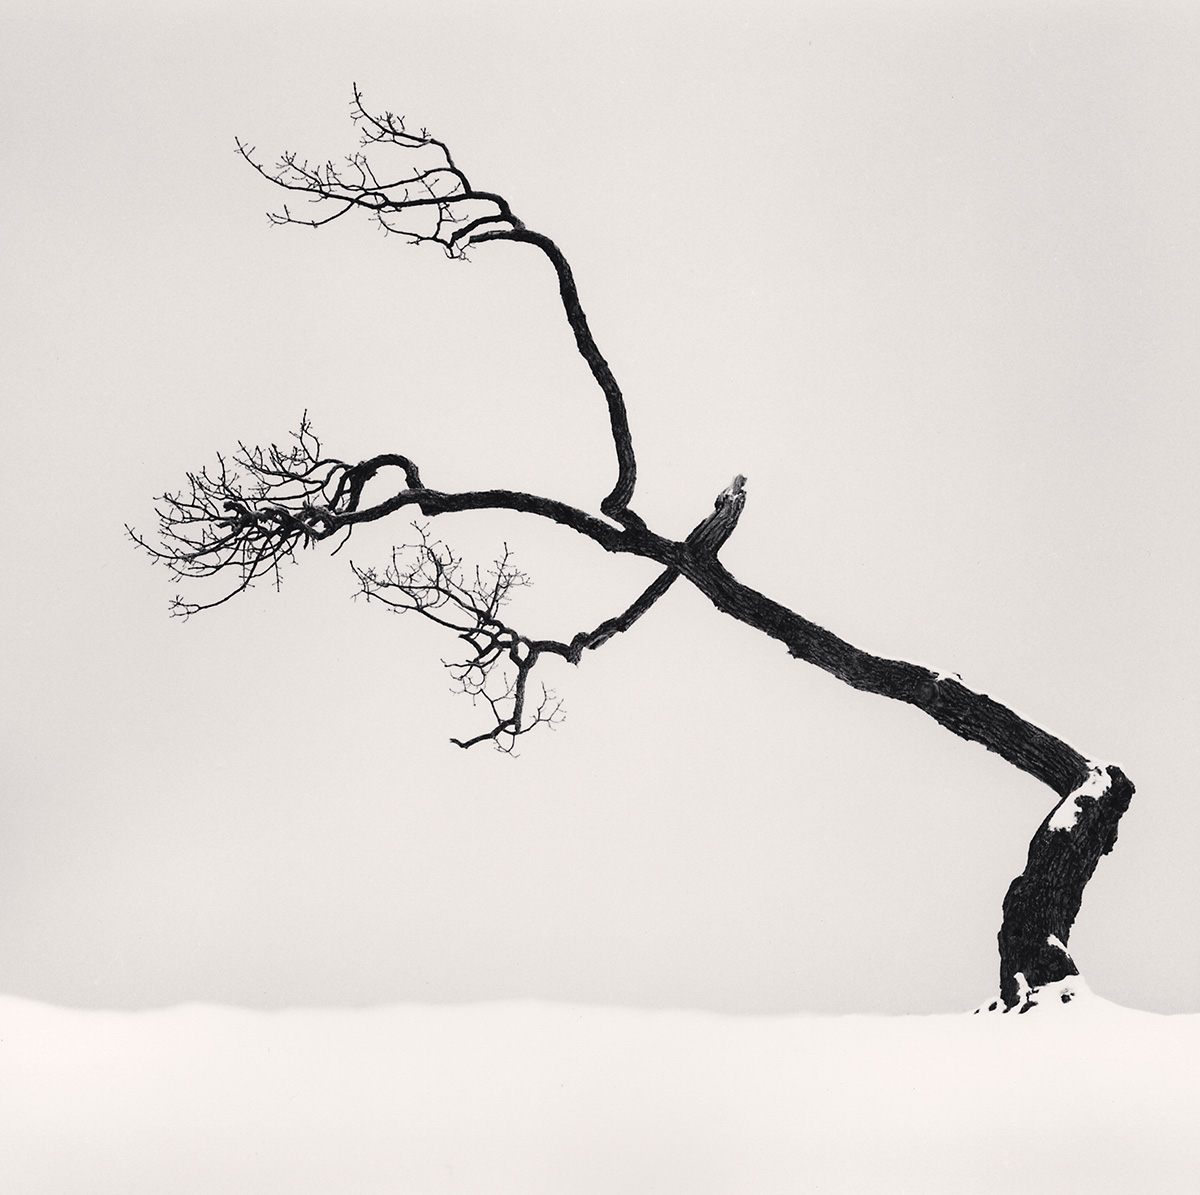 Black and white photo of a bare, bent tree in the snow